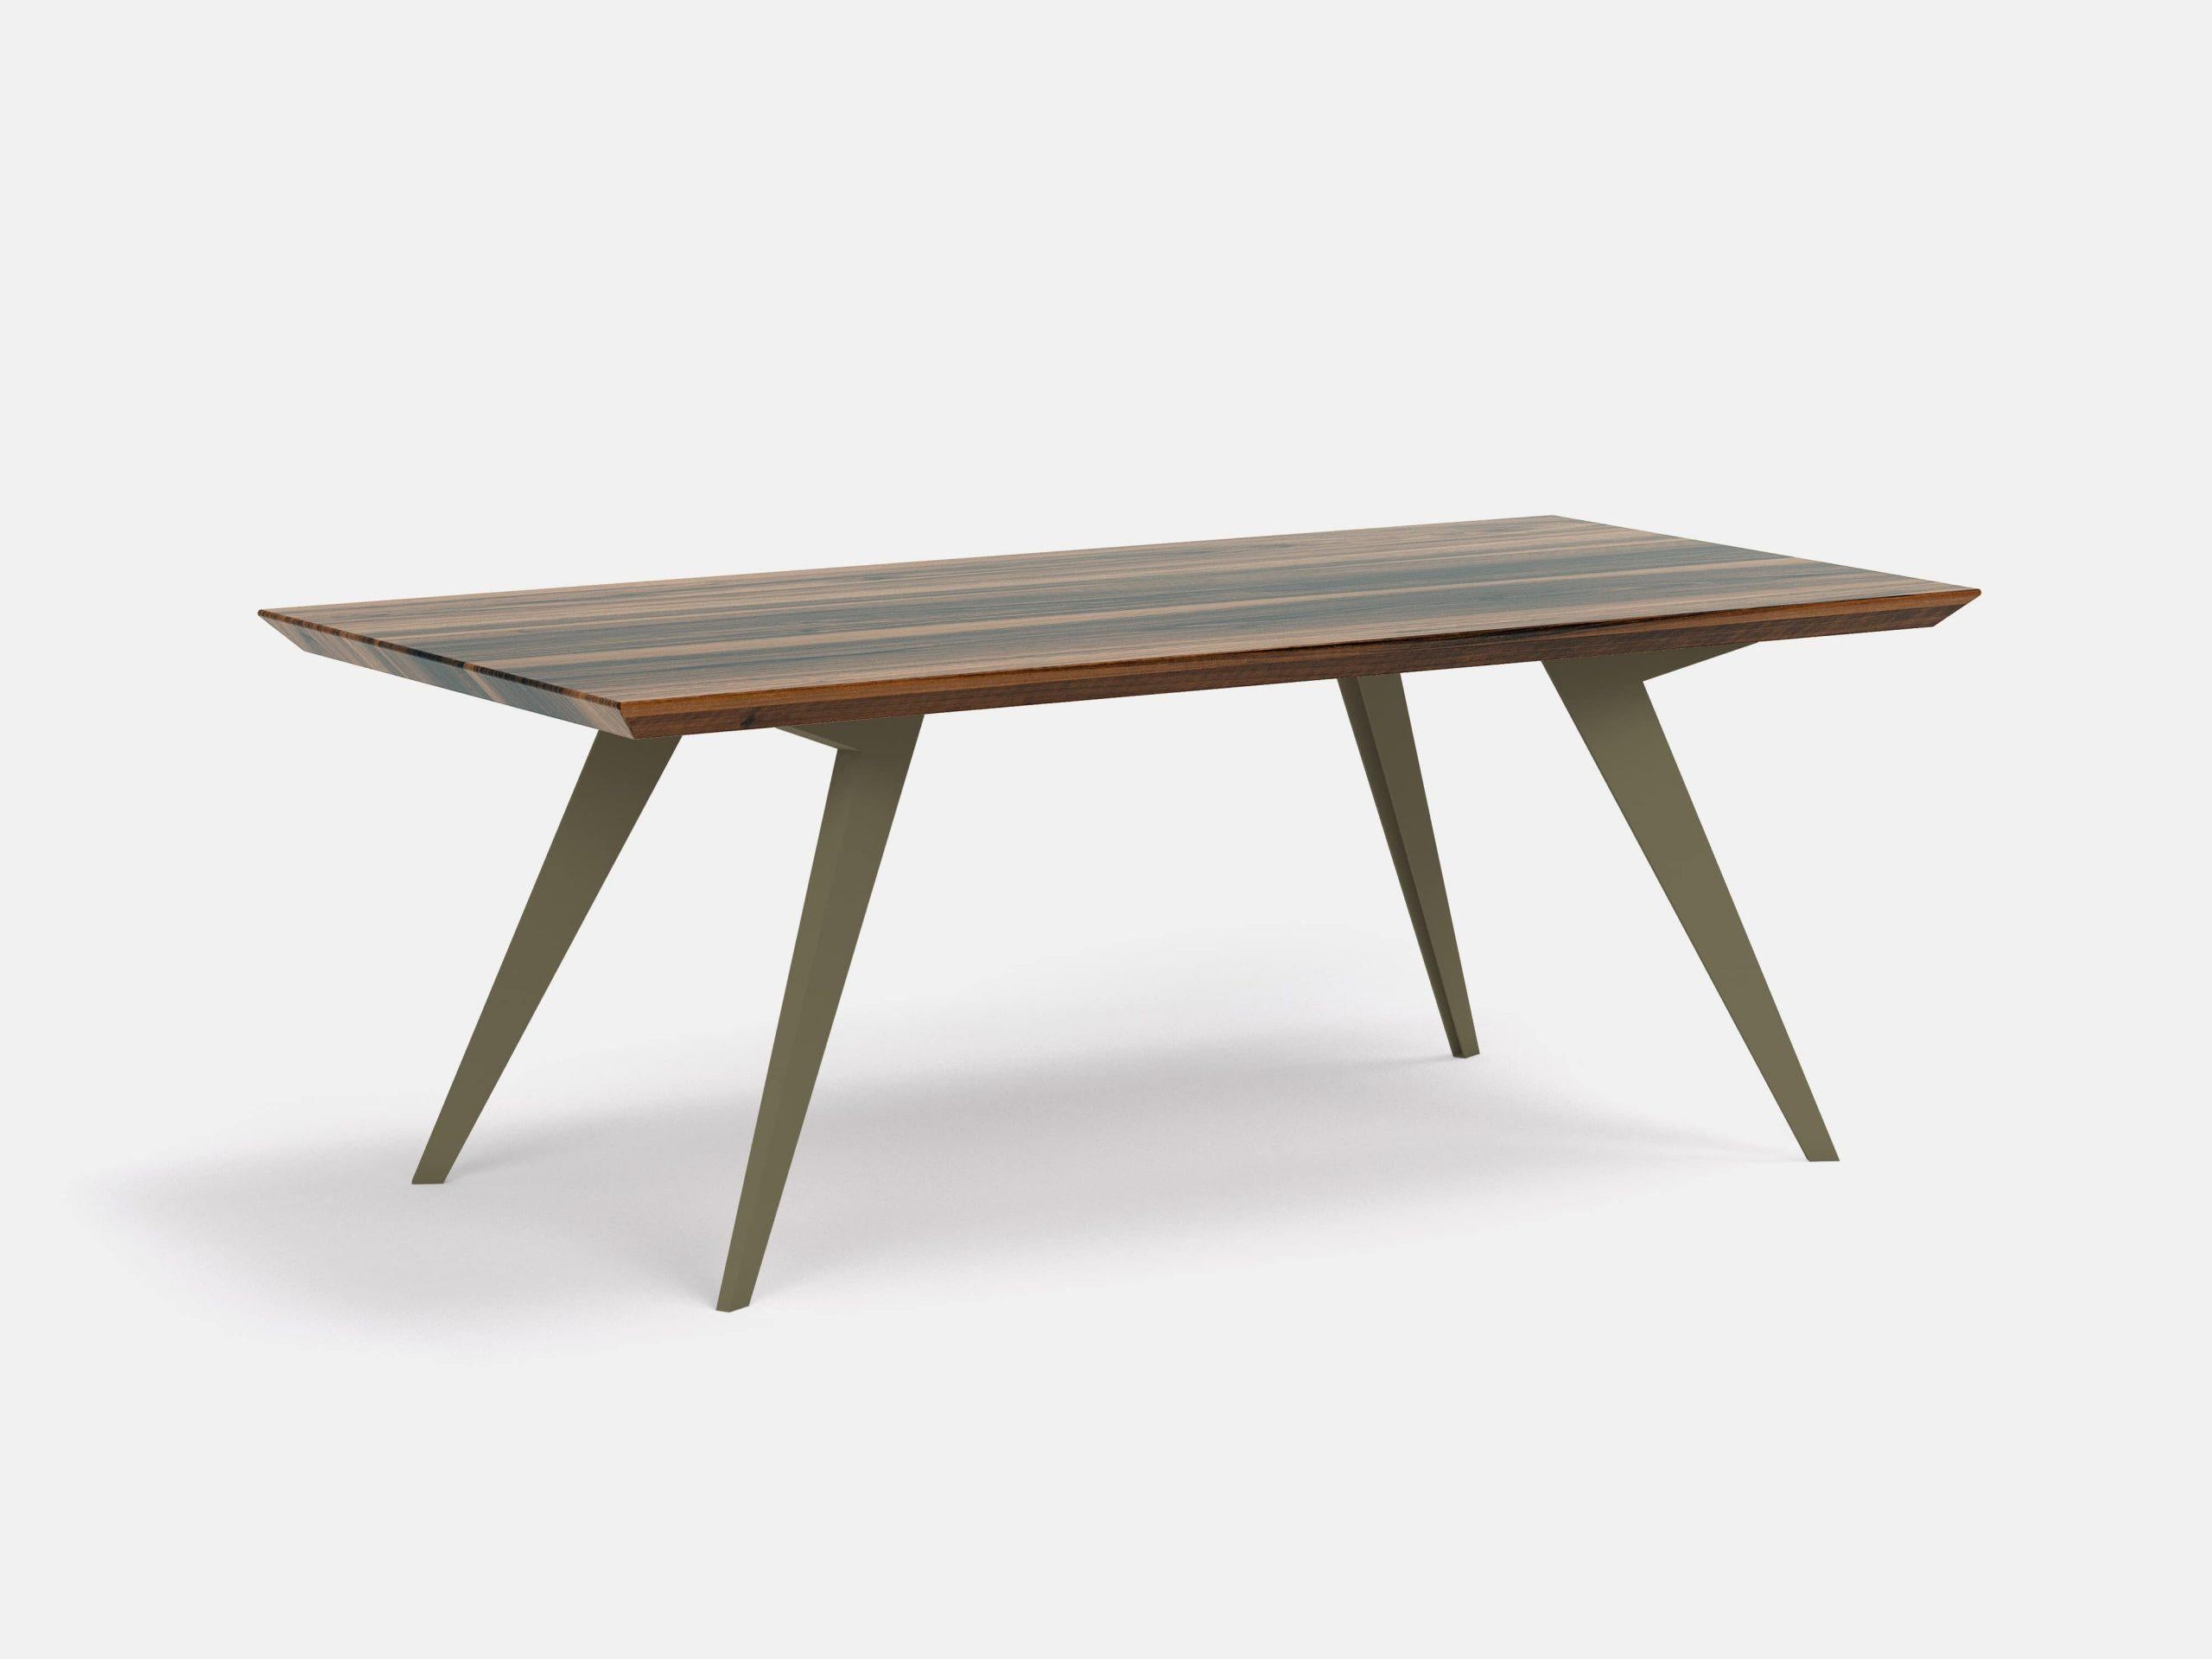 Walnut and steel Minimalist 250 dining table 
Dimensions: W 250 x D 100 x H 75 cm
Materials: American walnut 100% solid wood, steel legs

Dimensions available: 160, 200, 250, 300, 350, 400 cm
 

Roly-Poly table is the proof that through